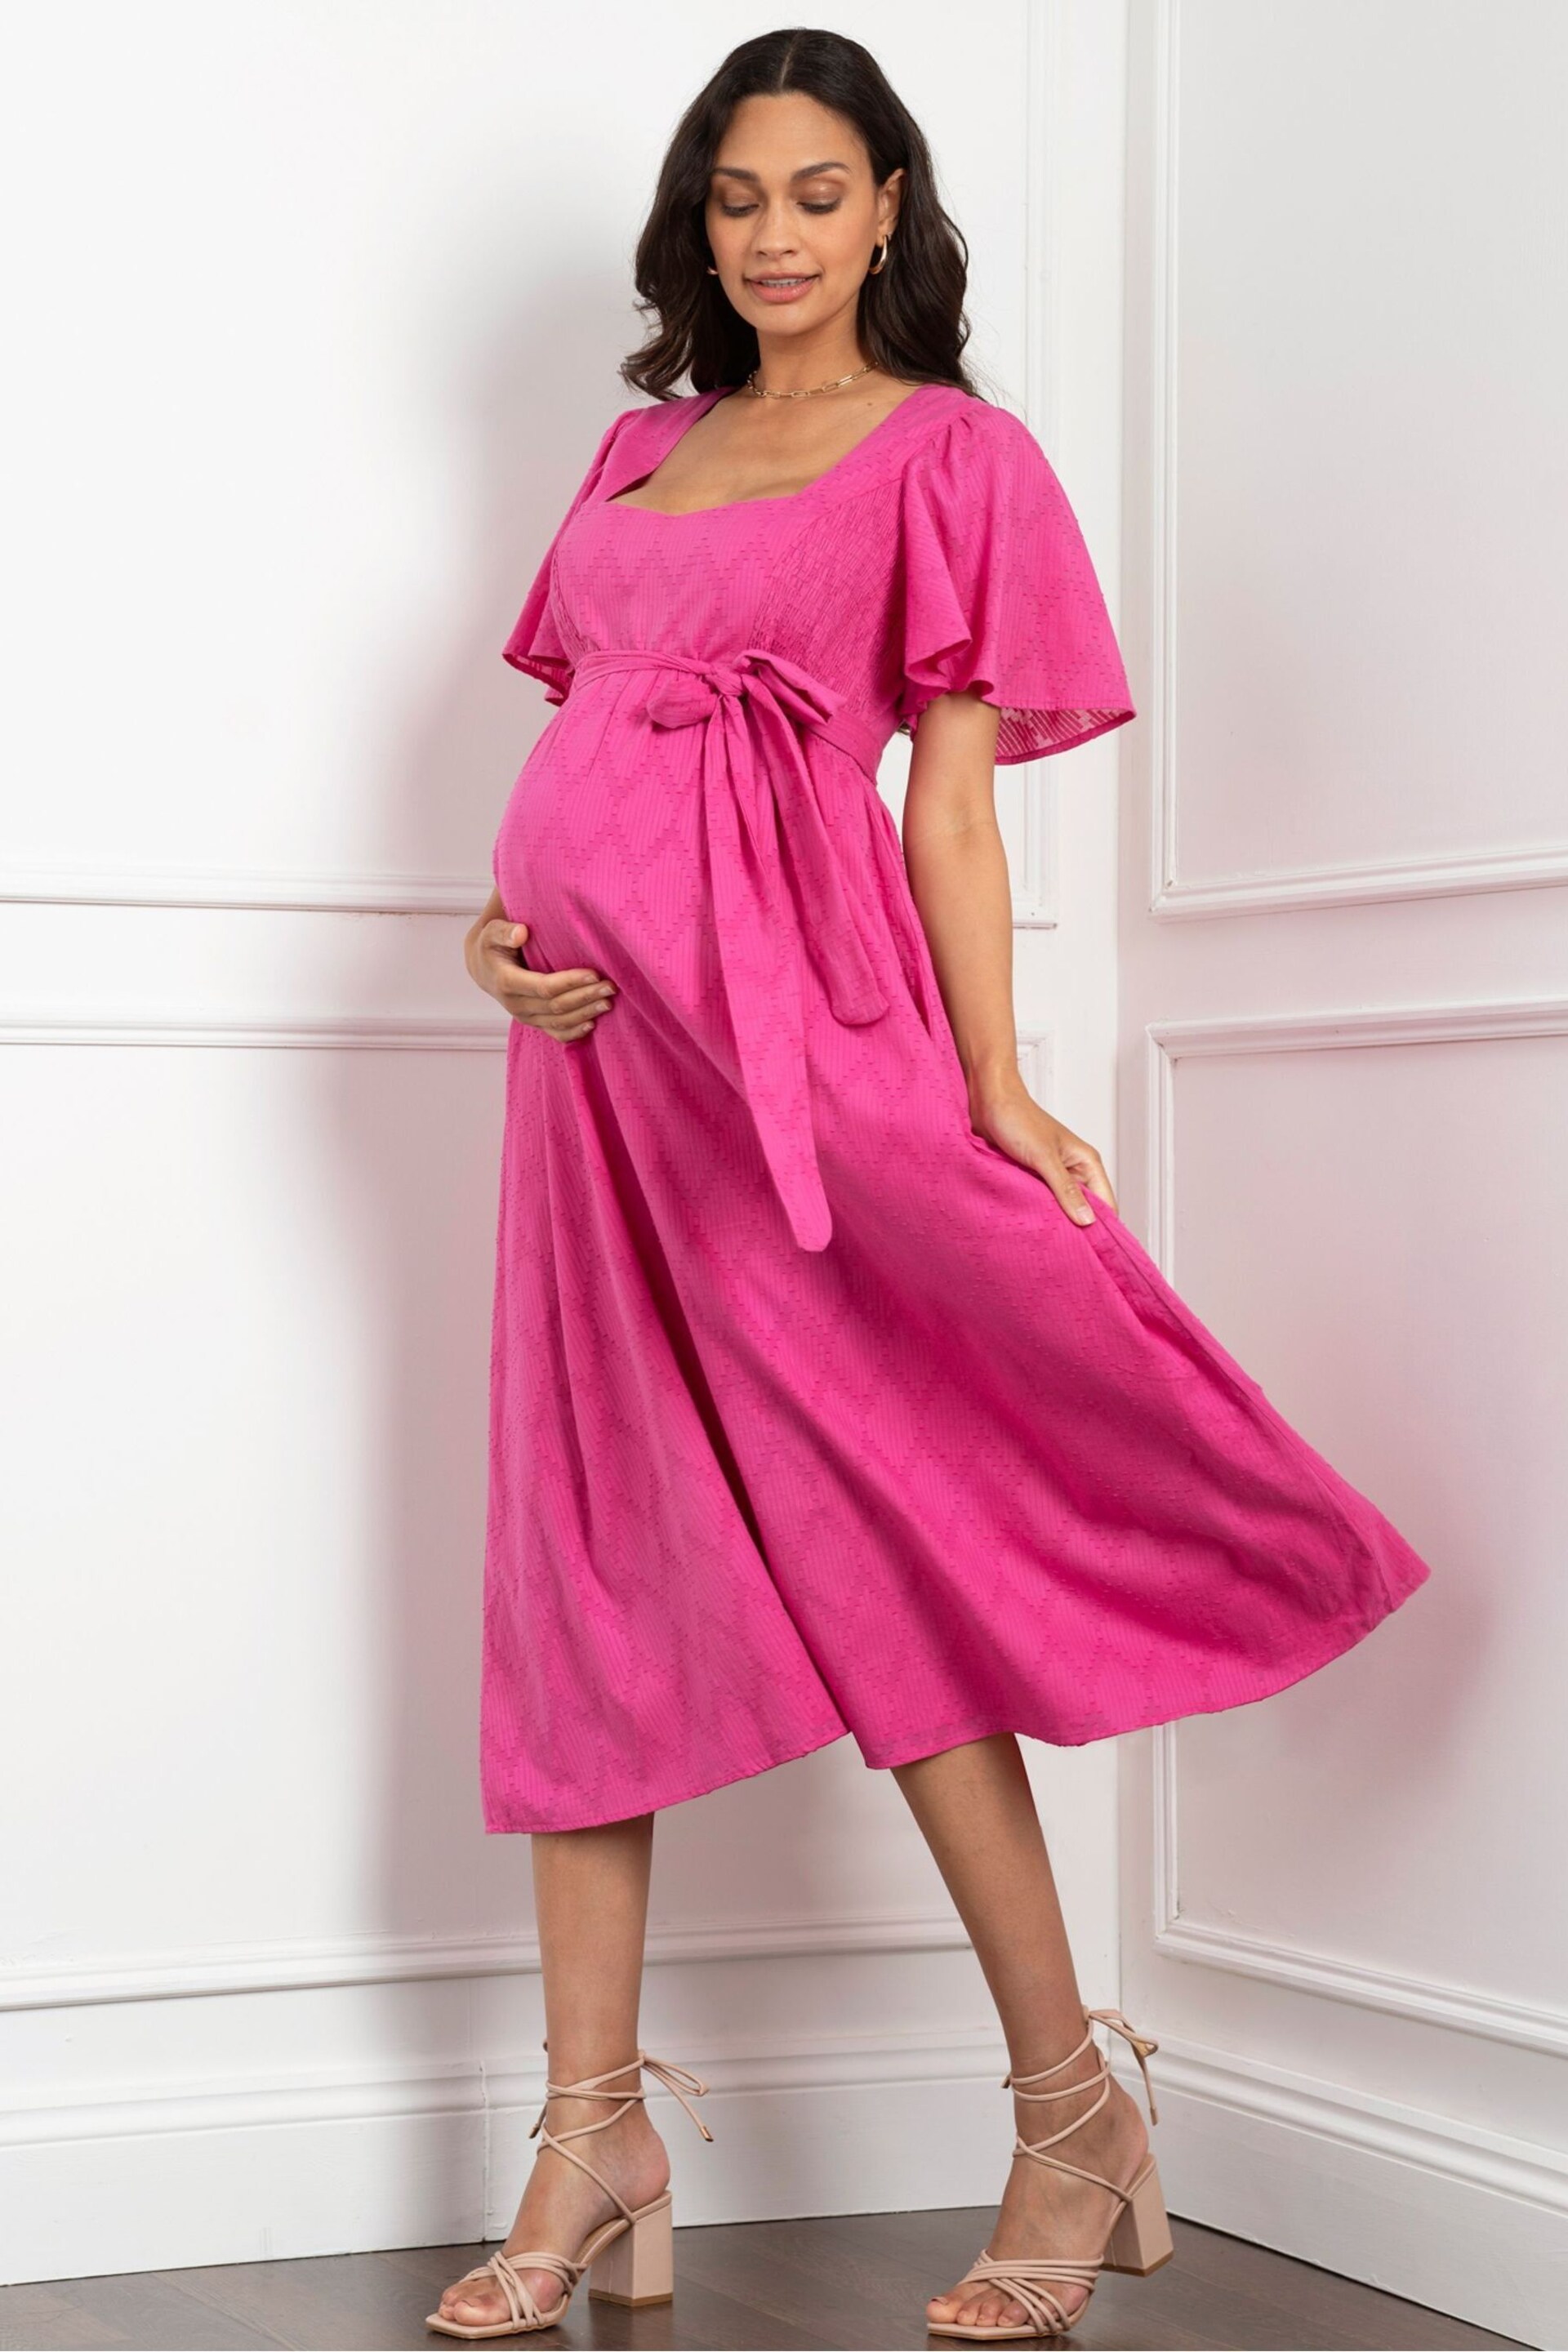 Seraphine Pink Cotton Broderie Maternity & Nursing Dress - Image 5 of 10